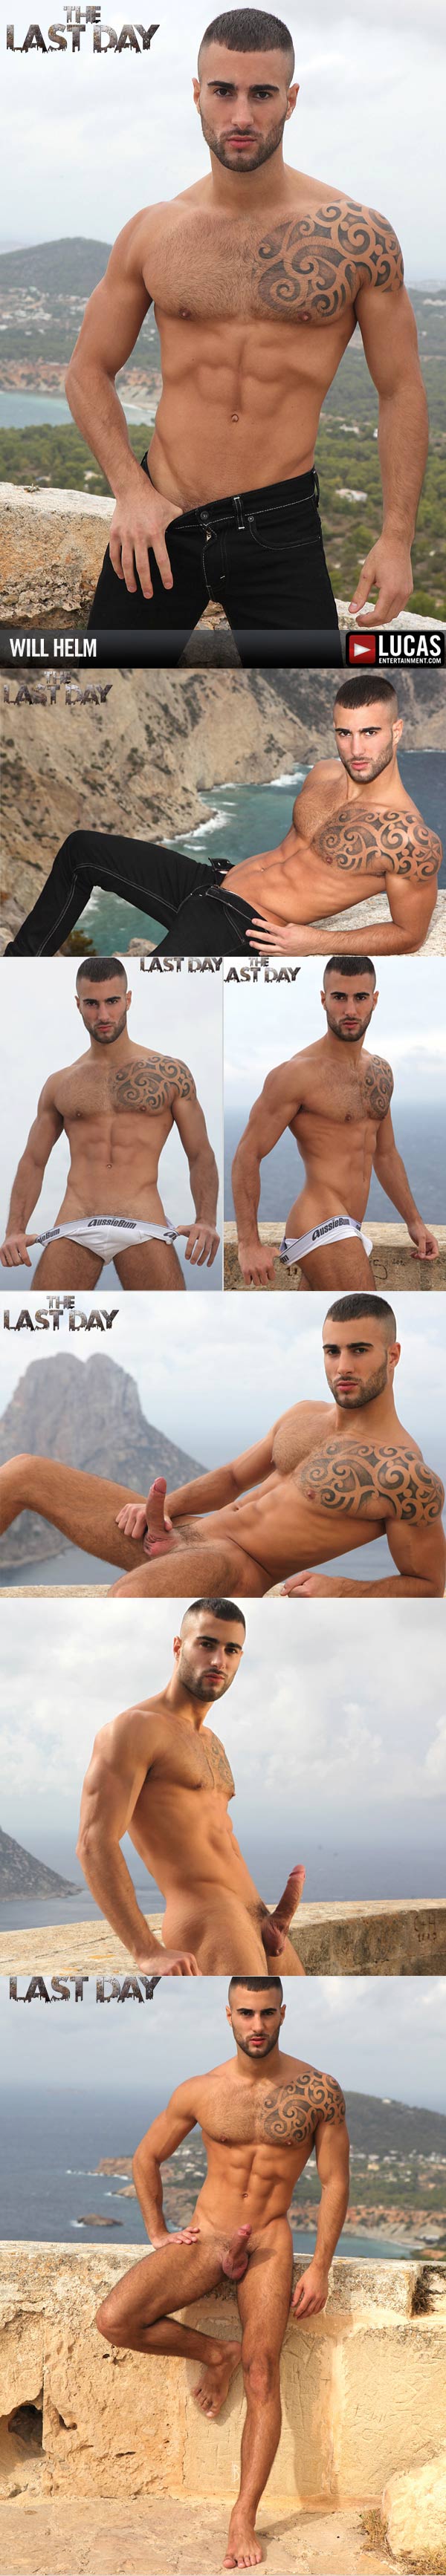 The Last Day (Jonathan Agassi, Will Helm & Kriss Aston) at LucasEntertainment.com